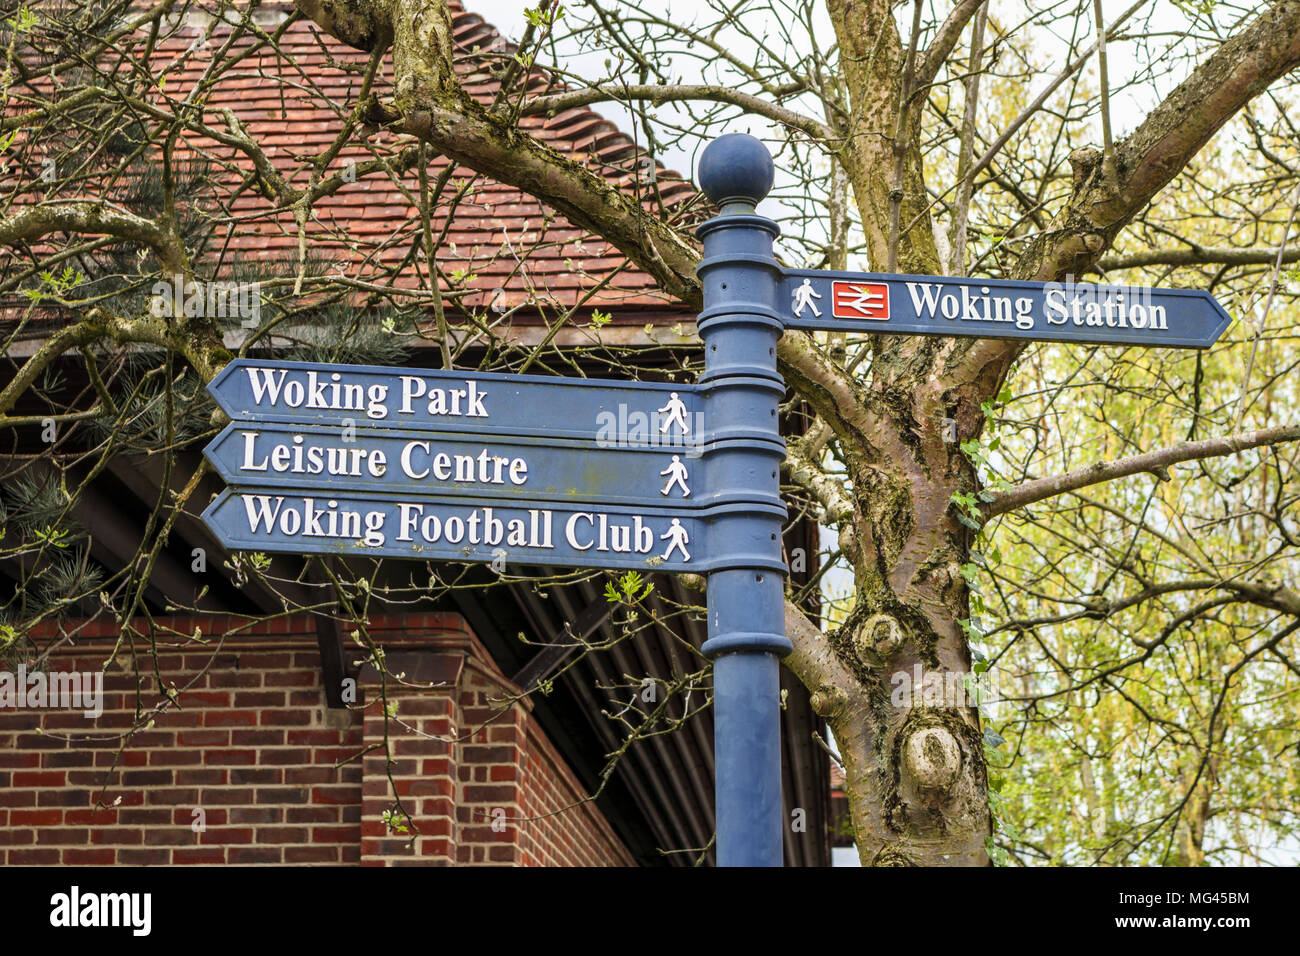 Direction sign to attractions, amenities and facilites in Woking, Surrey, UK: Woking Park, Leisure Centre, Woking Football Club, Woking Station Stock Photo